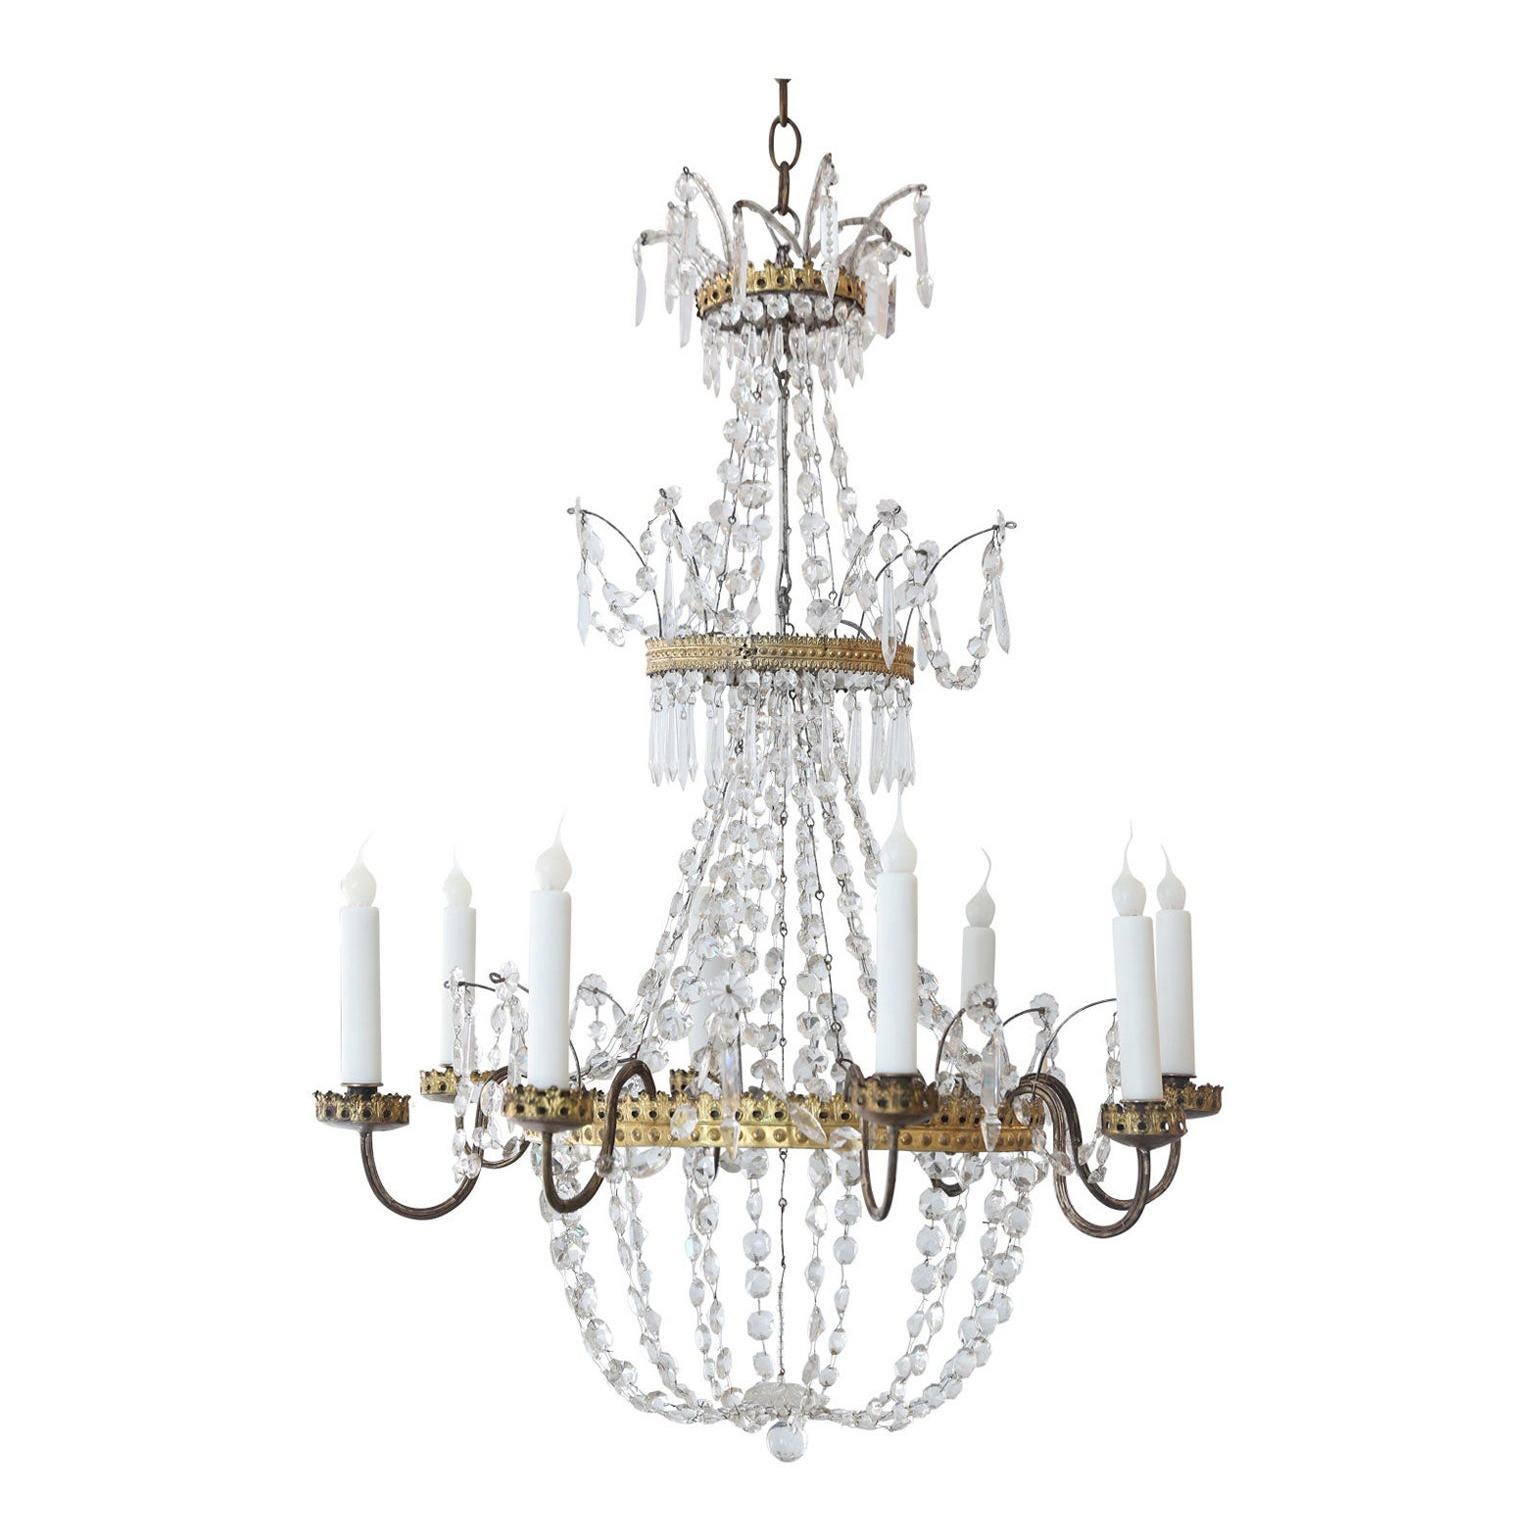 Neoclassical Gilt-Tole and Crystal Chandelier